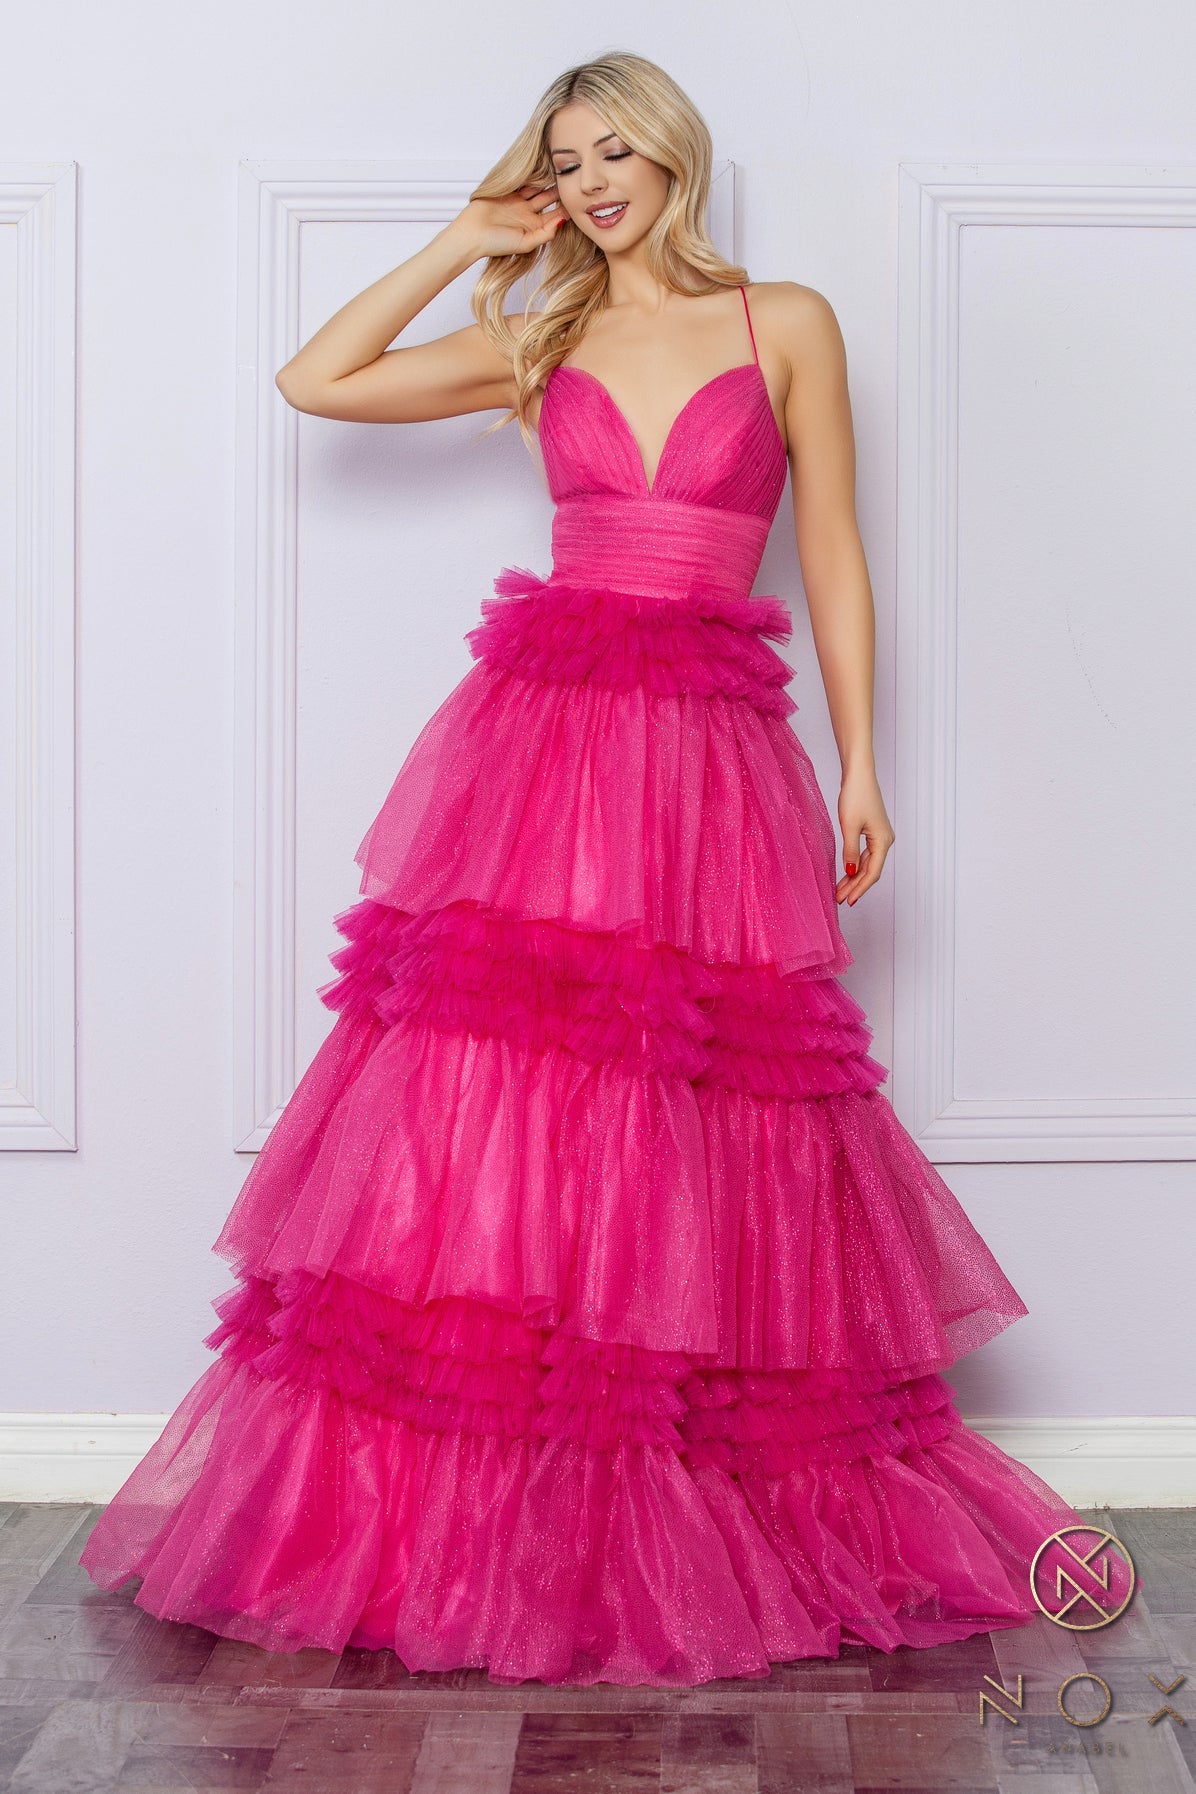 Nox Anabel R1316 A Line Pleated Shimmer Ballgown Prom Dress Layered Tulle Ruffle Corset Formal Gown